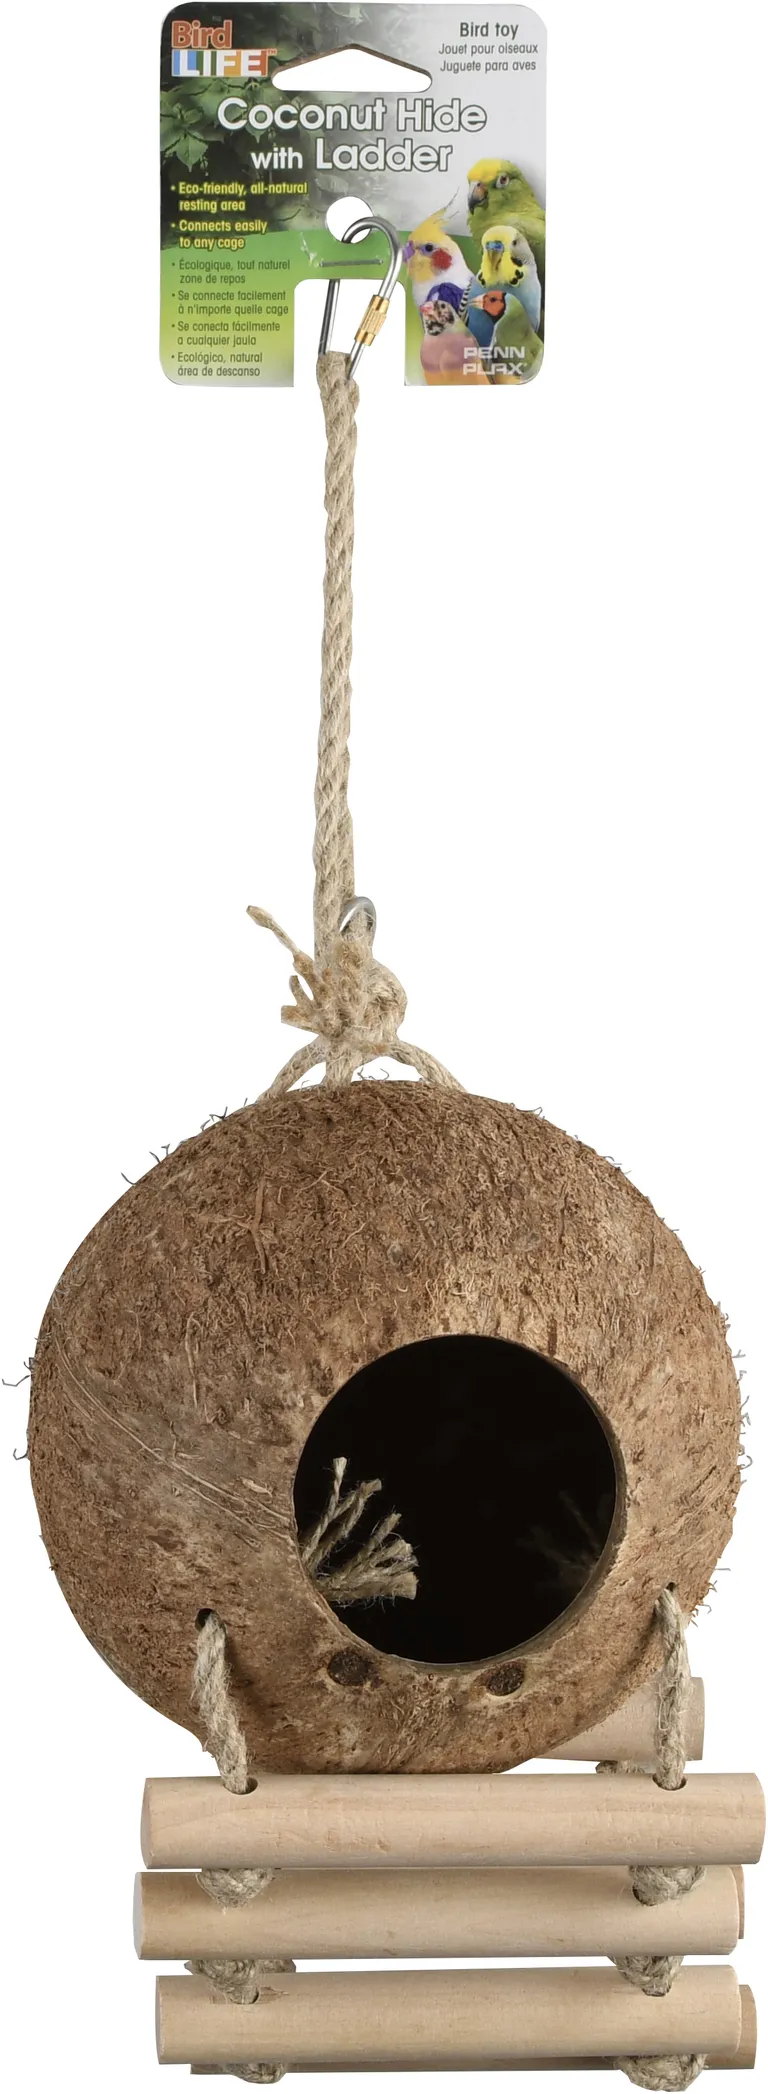 Penn Plax Coconut Coco-Hide with Ladder Photo 1